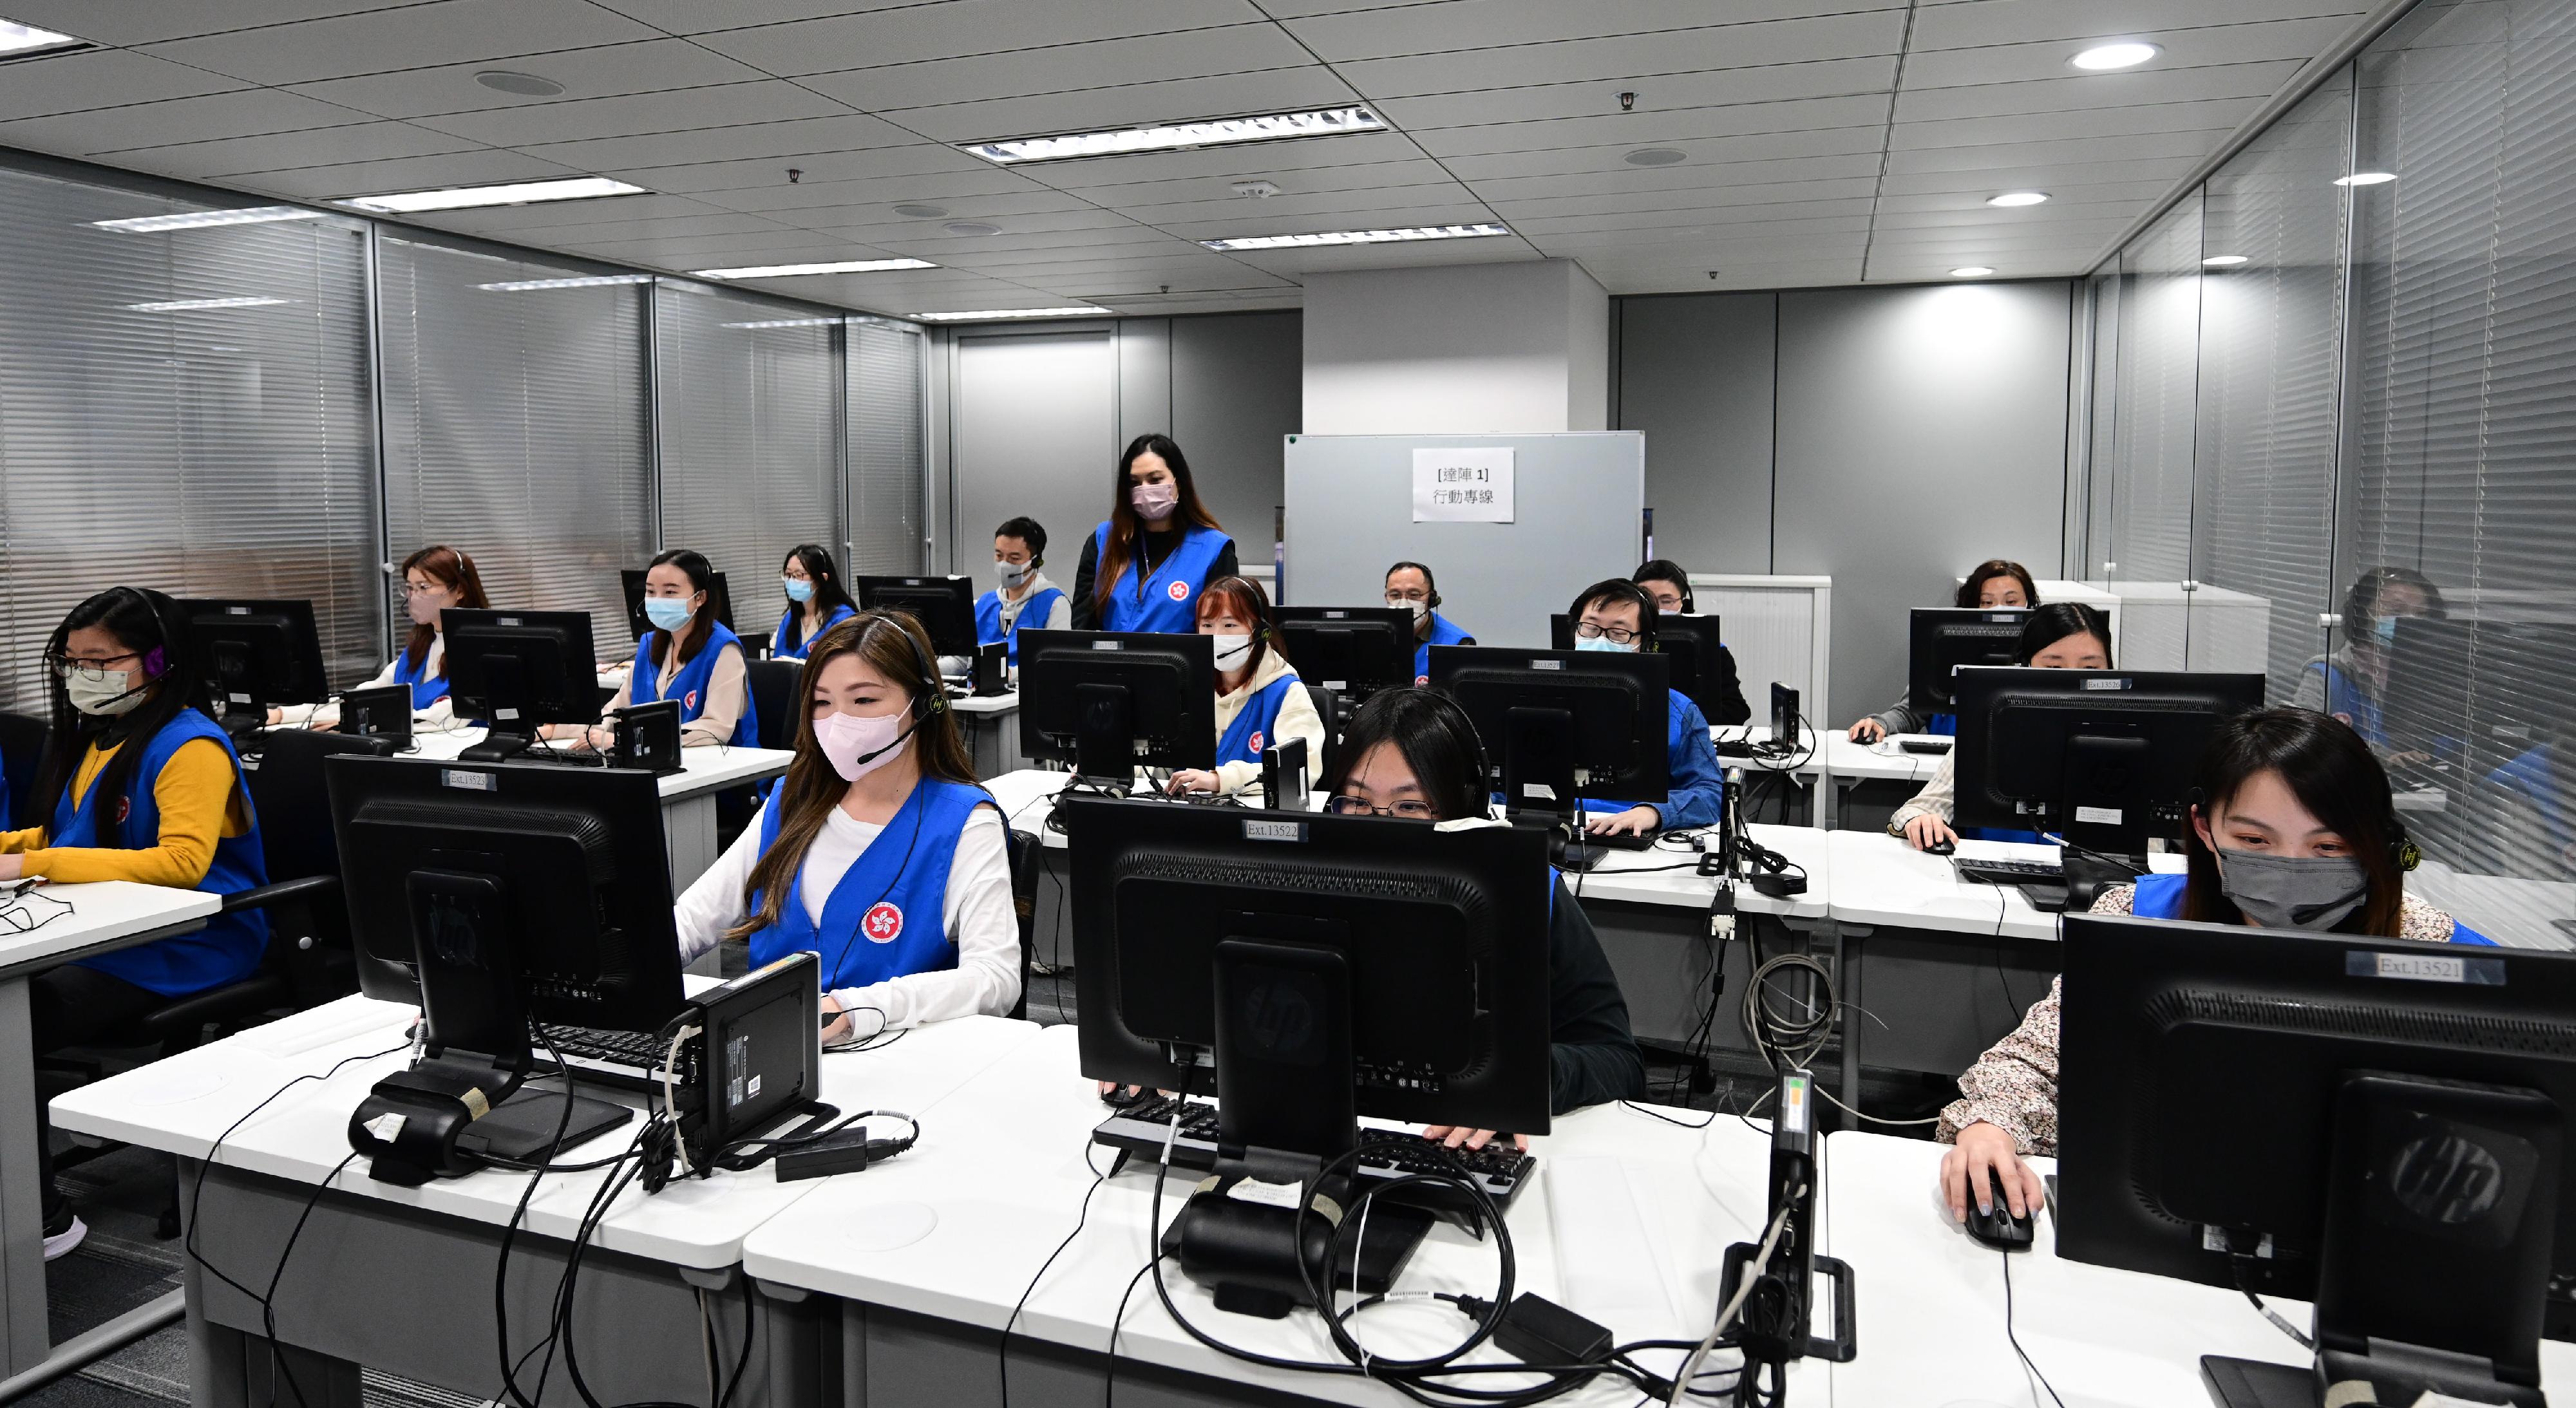 Around 10 000 staff members from 77 bureaux/departments participated in the first drill under the "government-wide mobilisation" level after its introduction at various locations today (February 16). Among them, the 1823 Call Centre under the Efficiency Office simulated the provision of enquiry hotline support services.